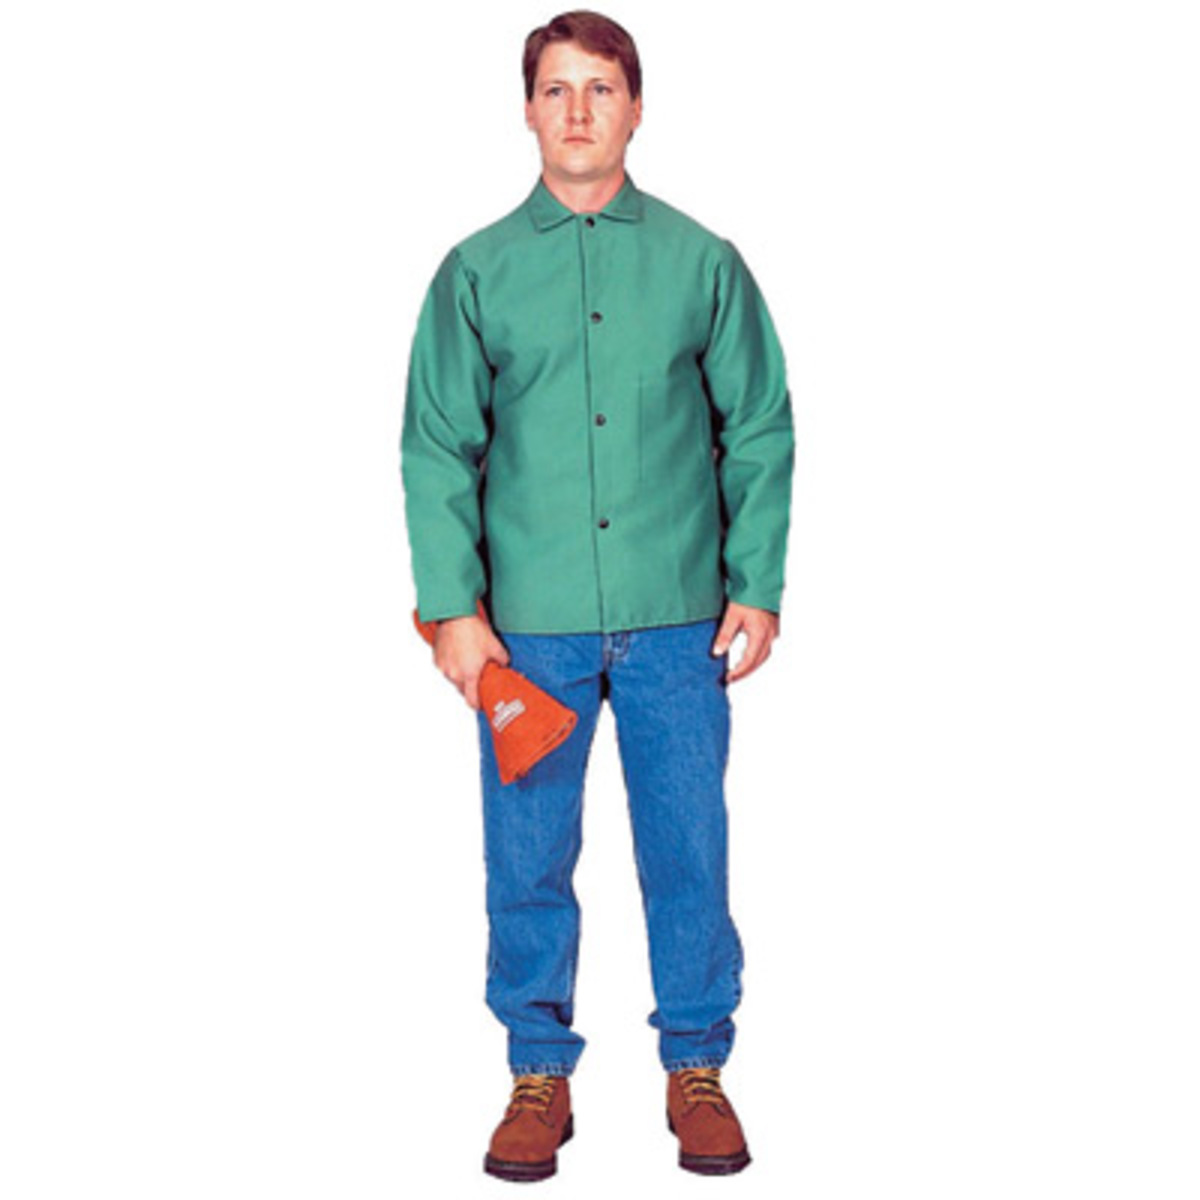 Stanco Safety Products™ Size 3X Green Cotton Flame Resistant Welding Jacket With Snap Closure